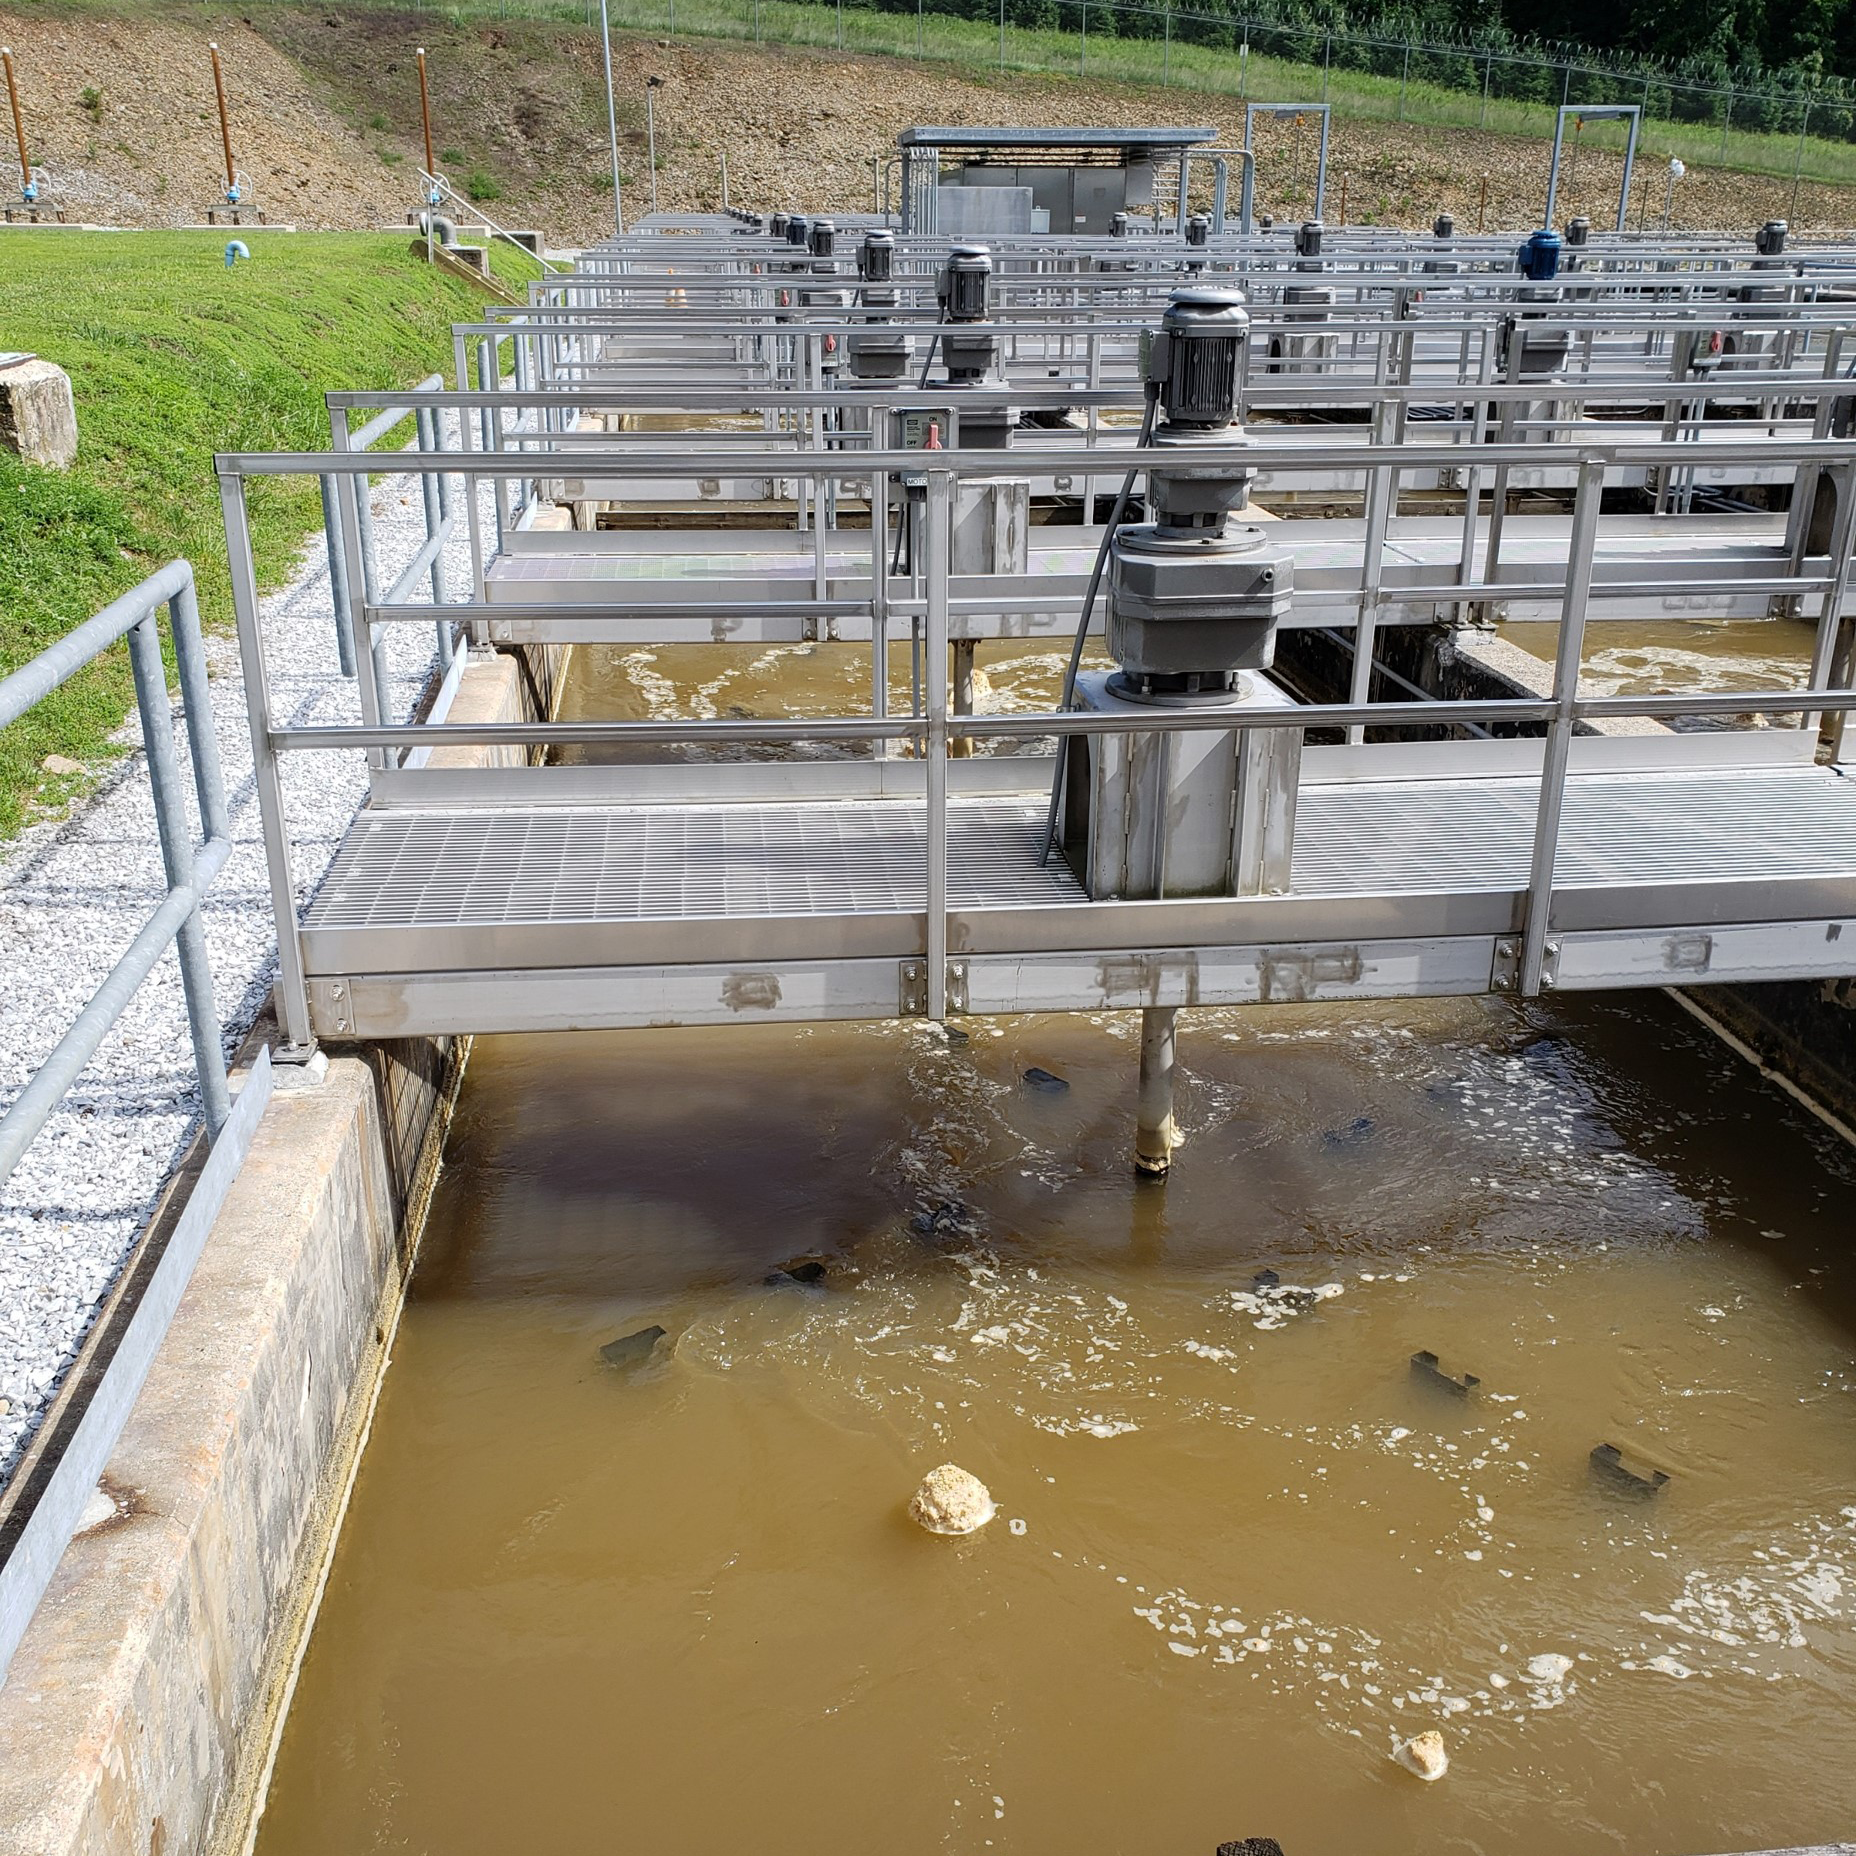 Flocculation tanks are shown. A foamy substance forms on top of cloudy water.